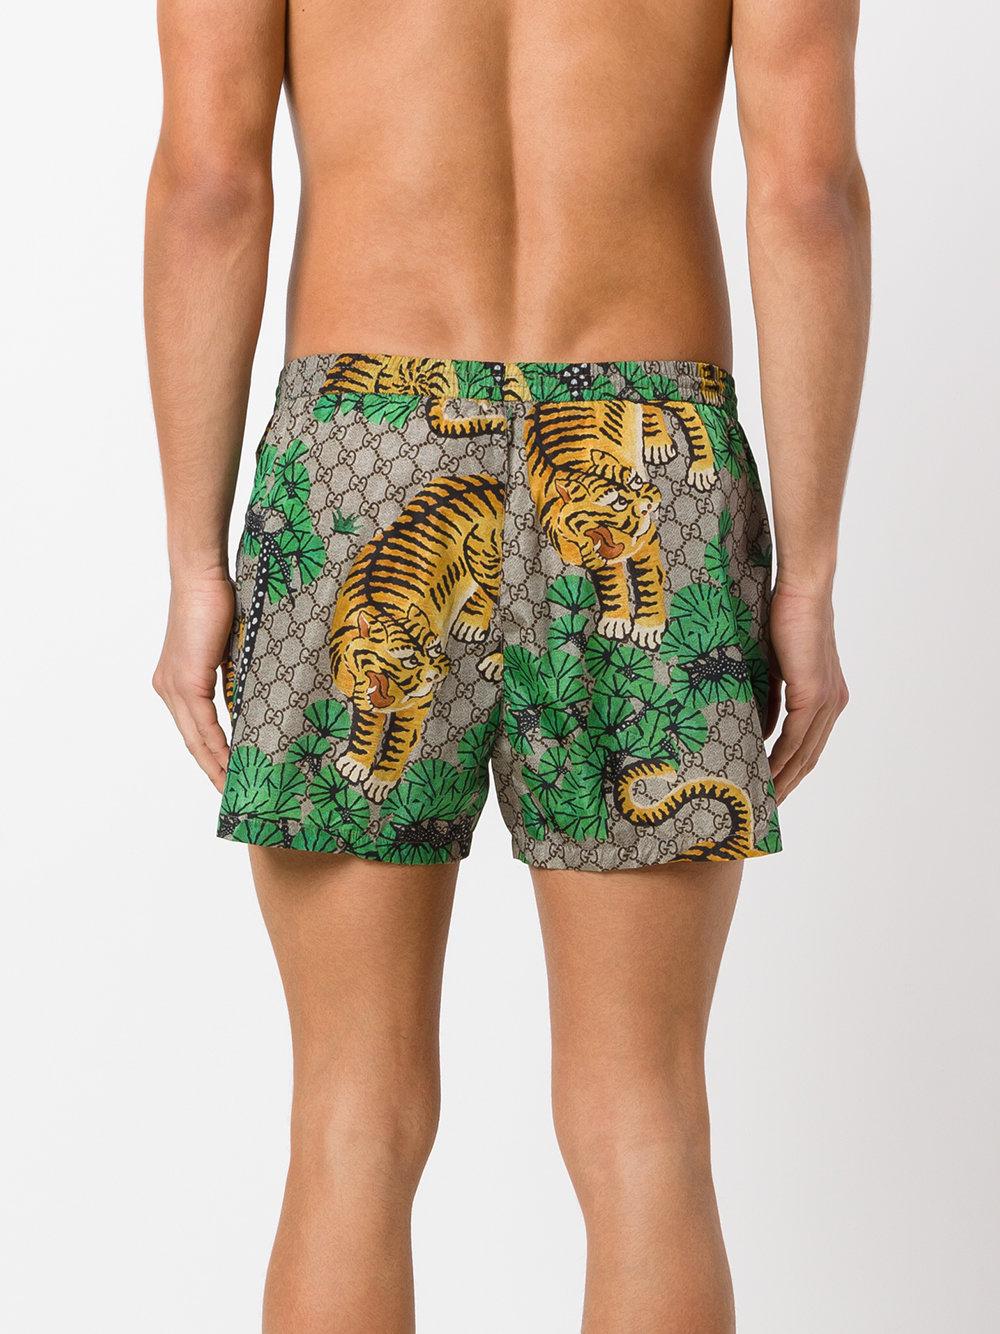 Lyst - Gucci Bengal Swim Shorts in Green for Men